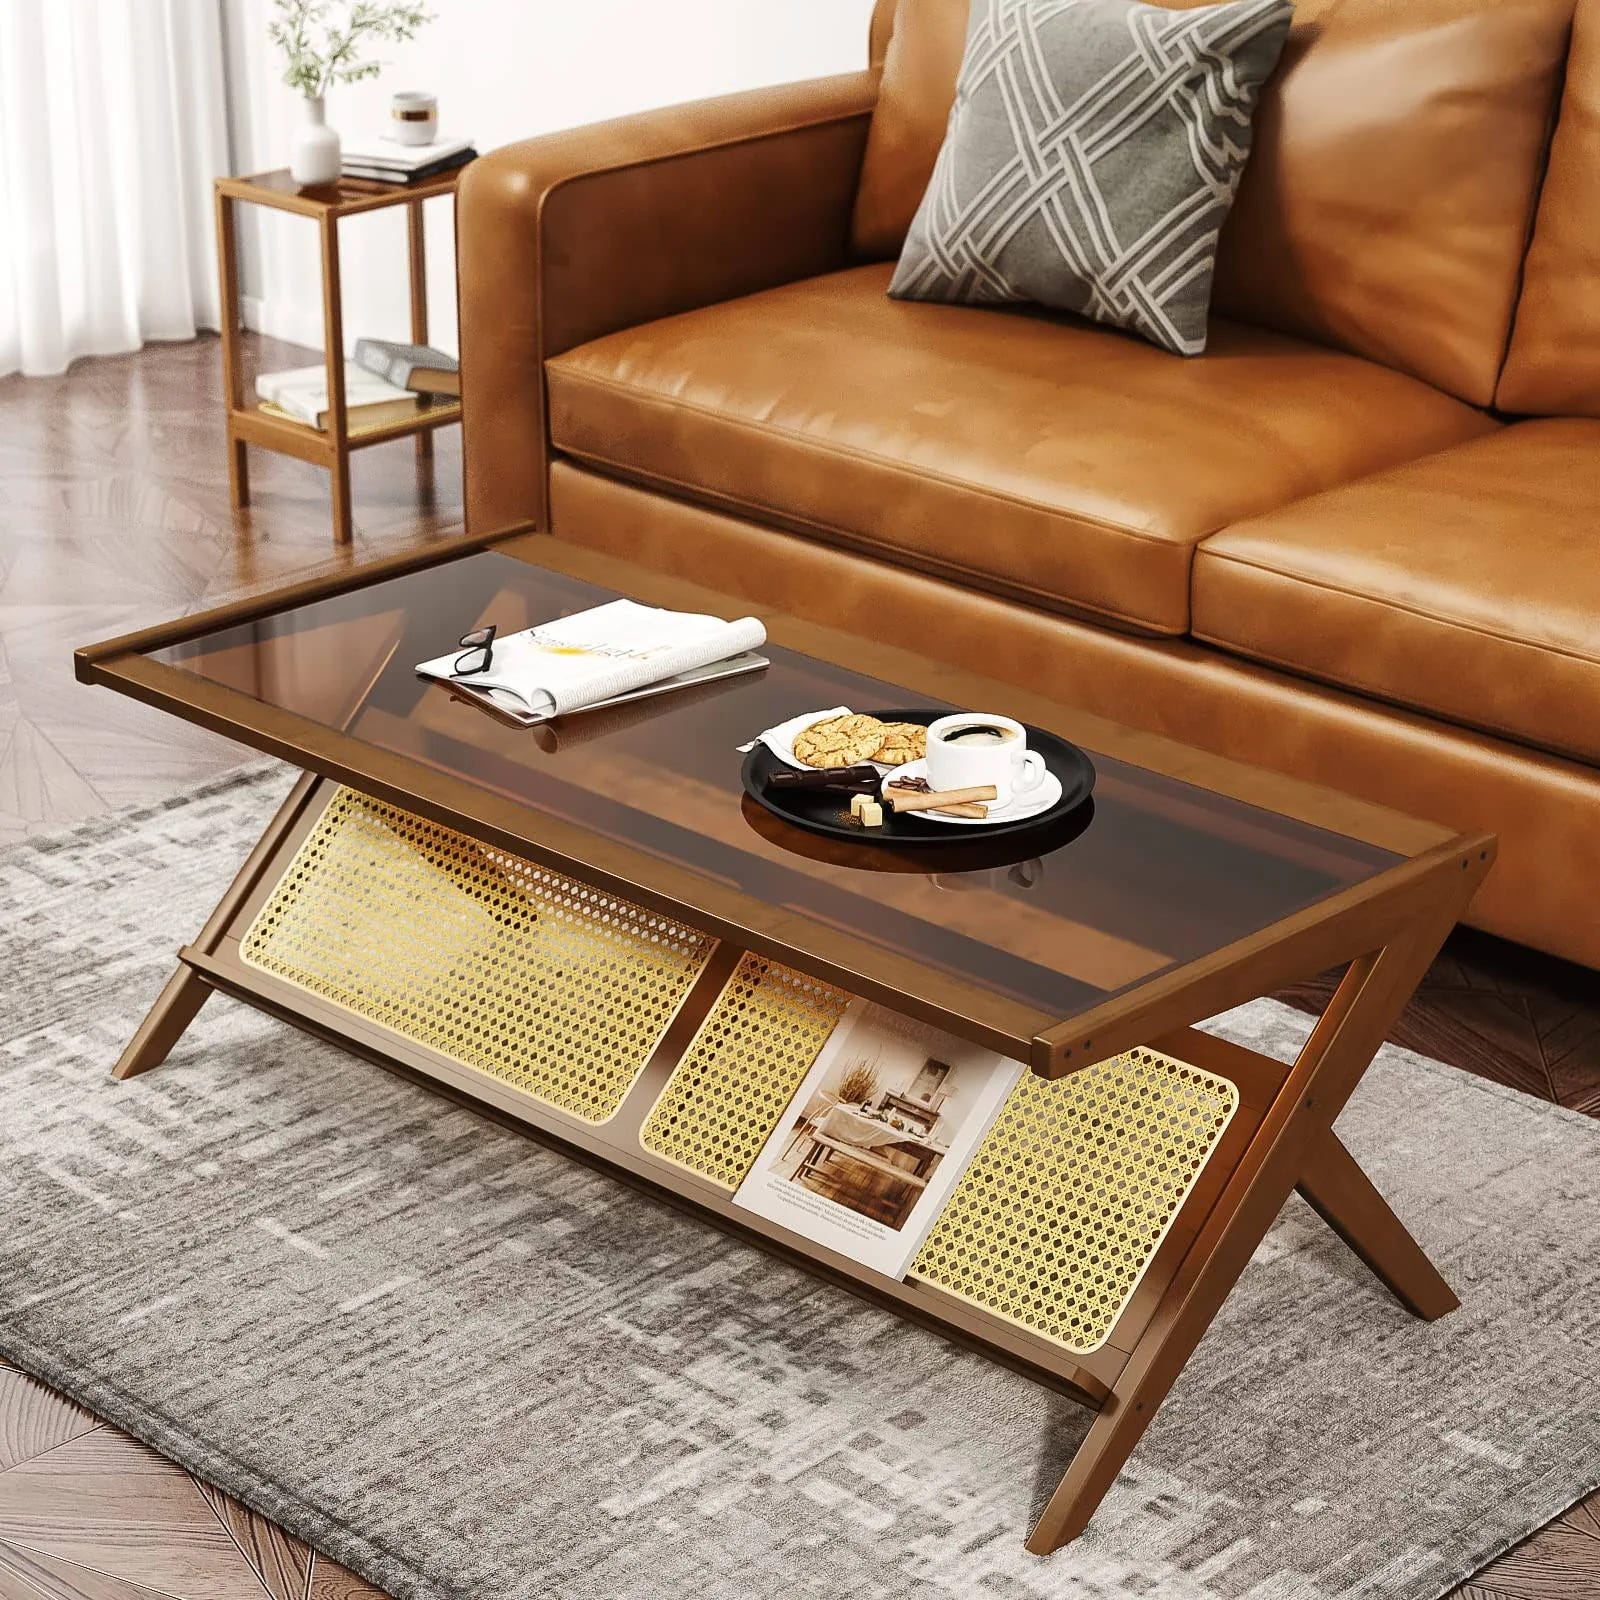 Chic Mid-Century Modern Coffee Table with Glass Top | Image